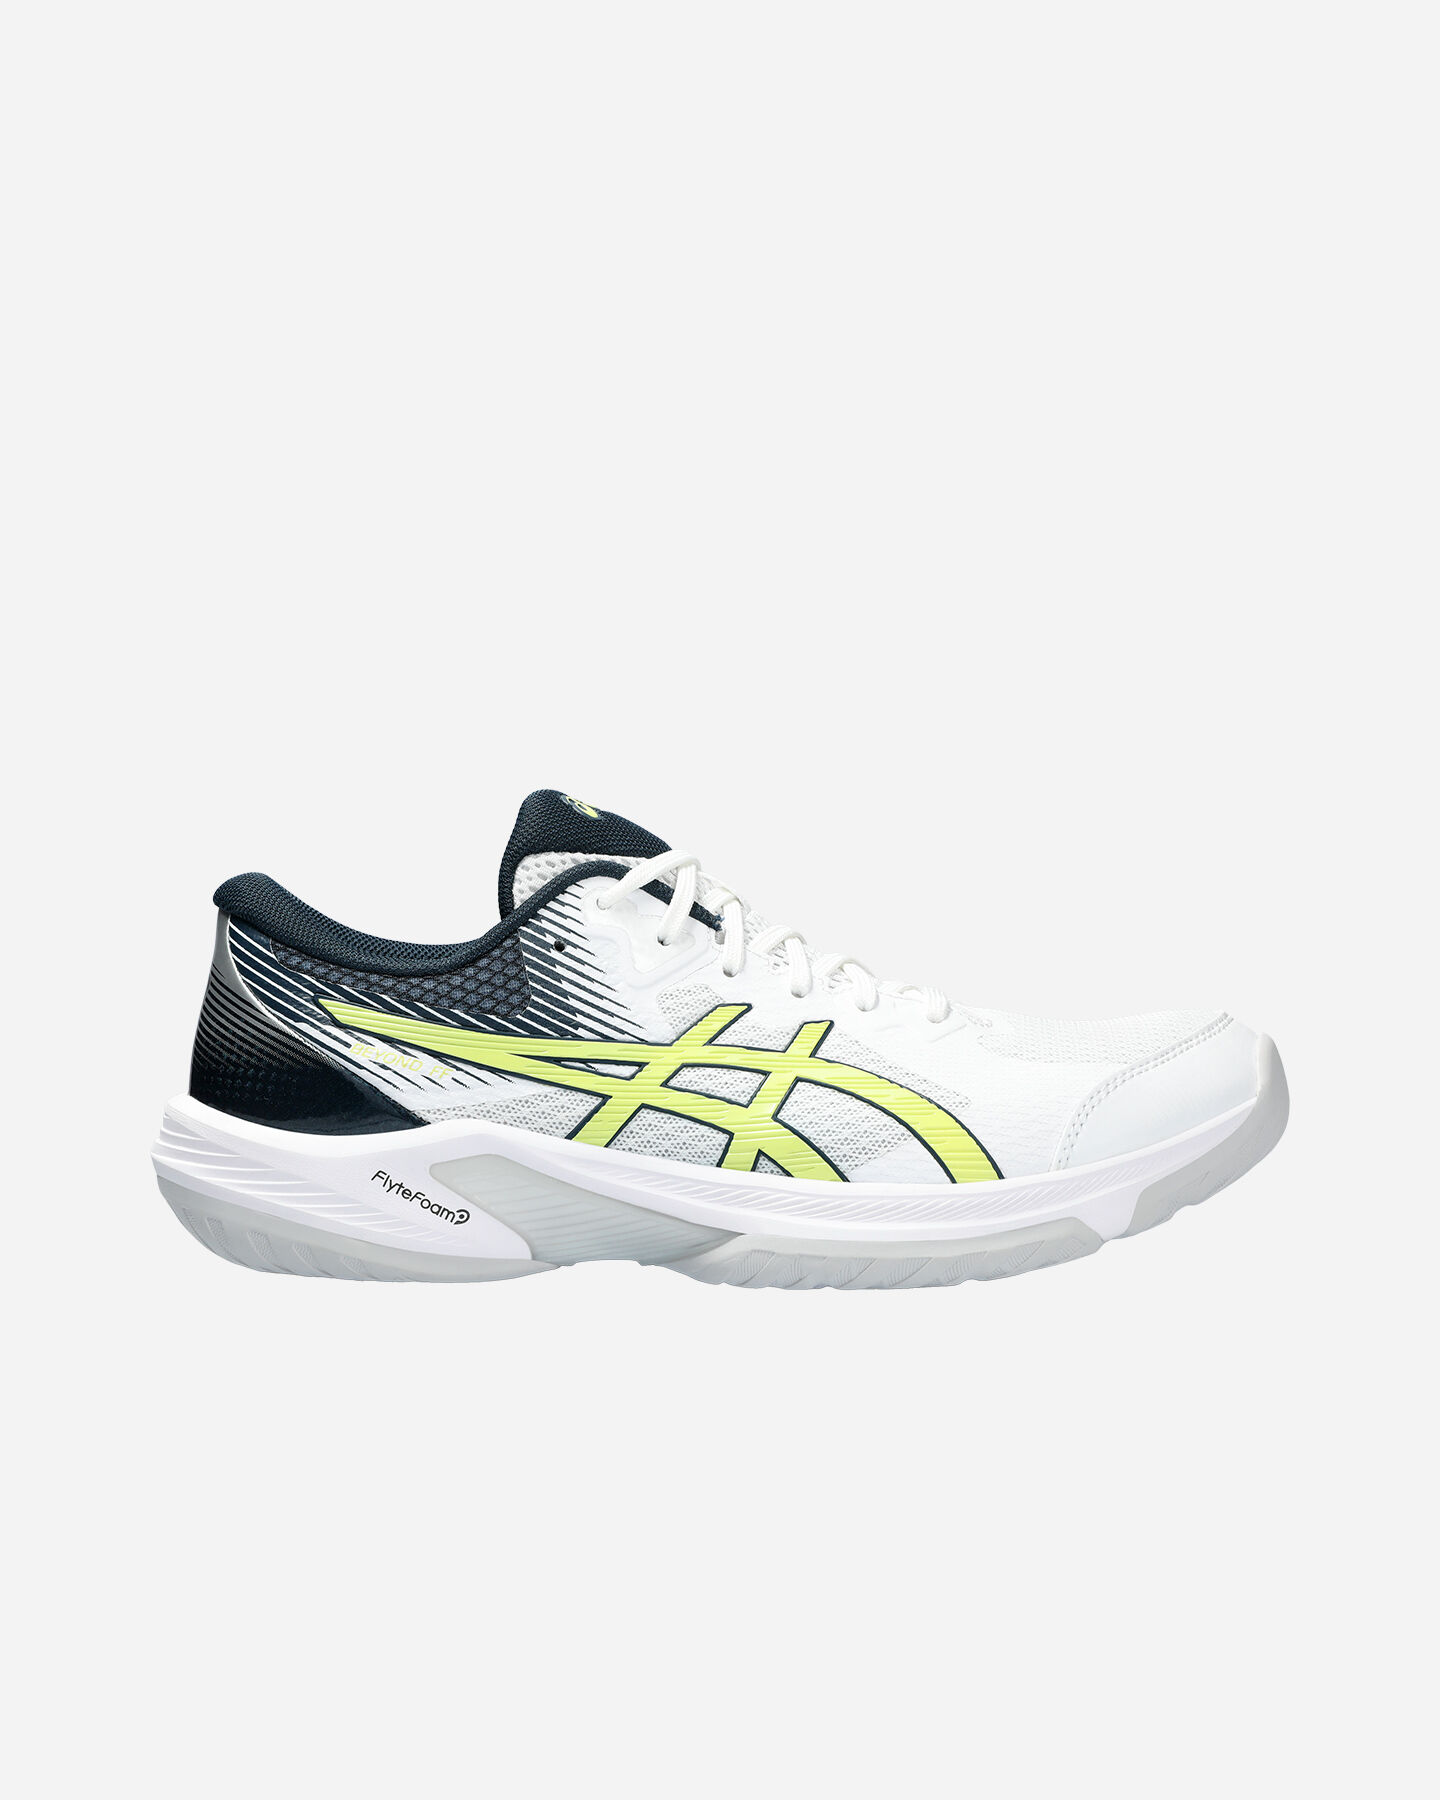  Scarpe volley ASICS BEYOND M S5585381|100|7 scatto 0